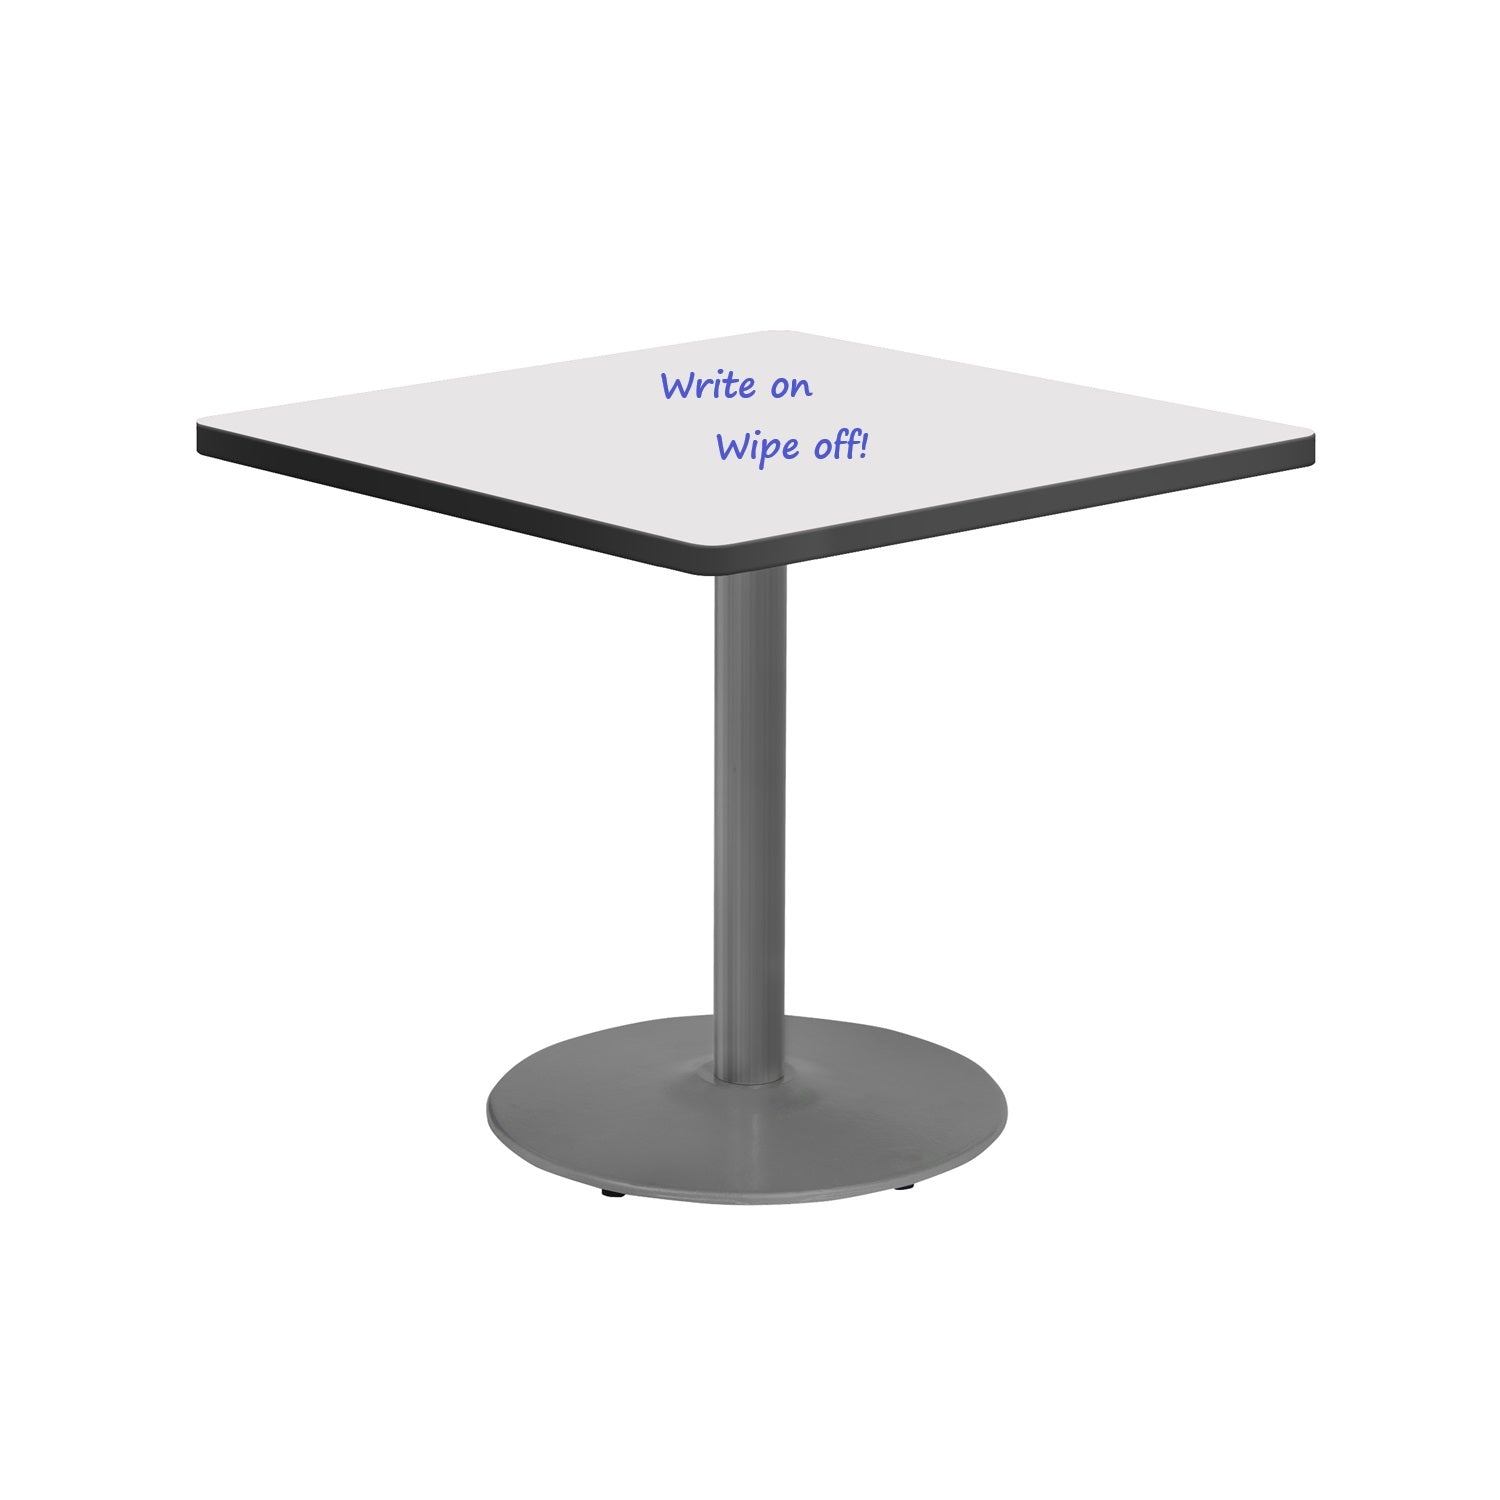 36" Square Sitting Height Café Table with Dry-Erase Laminate Markerboard Top